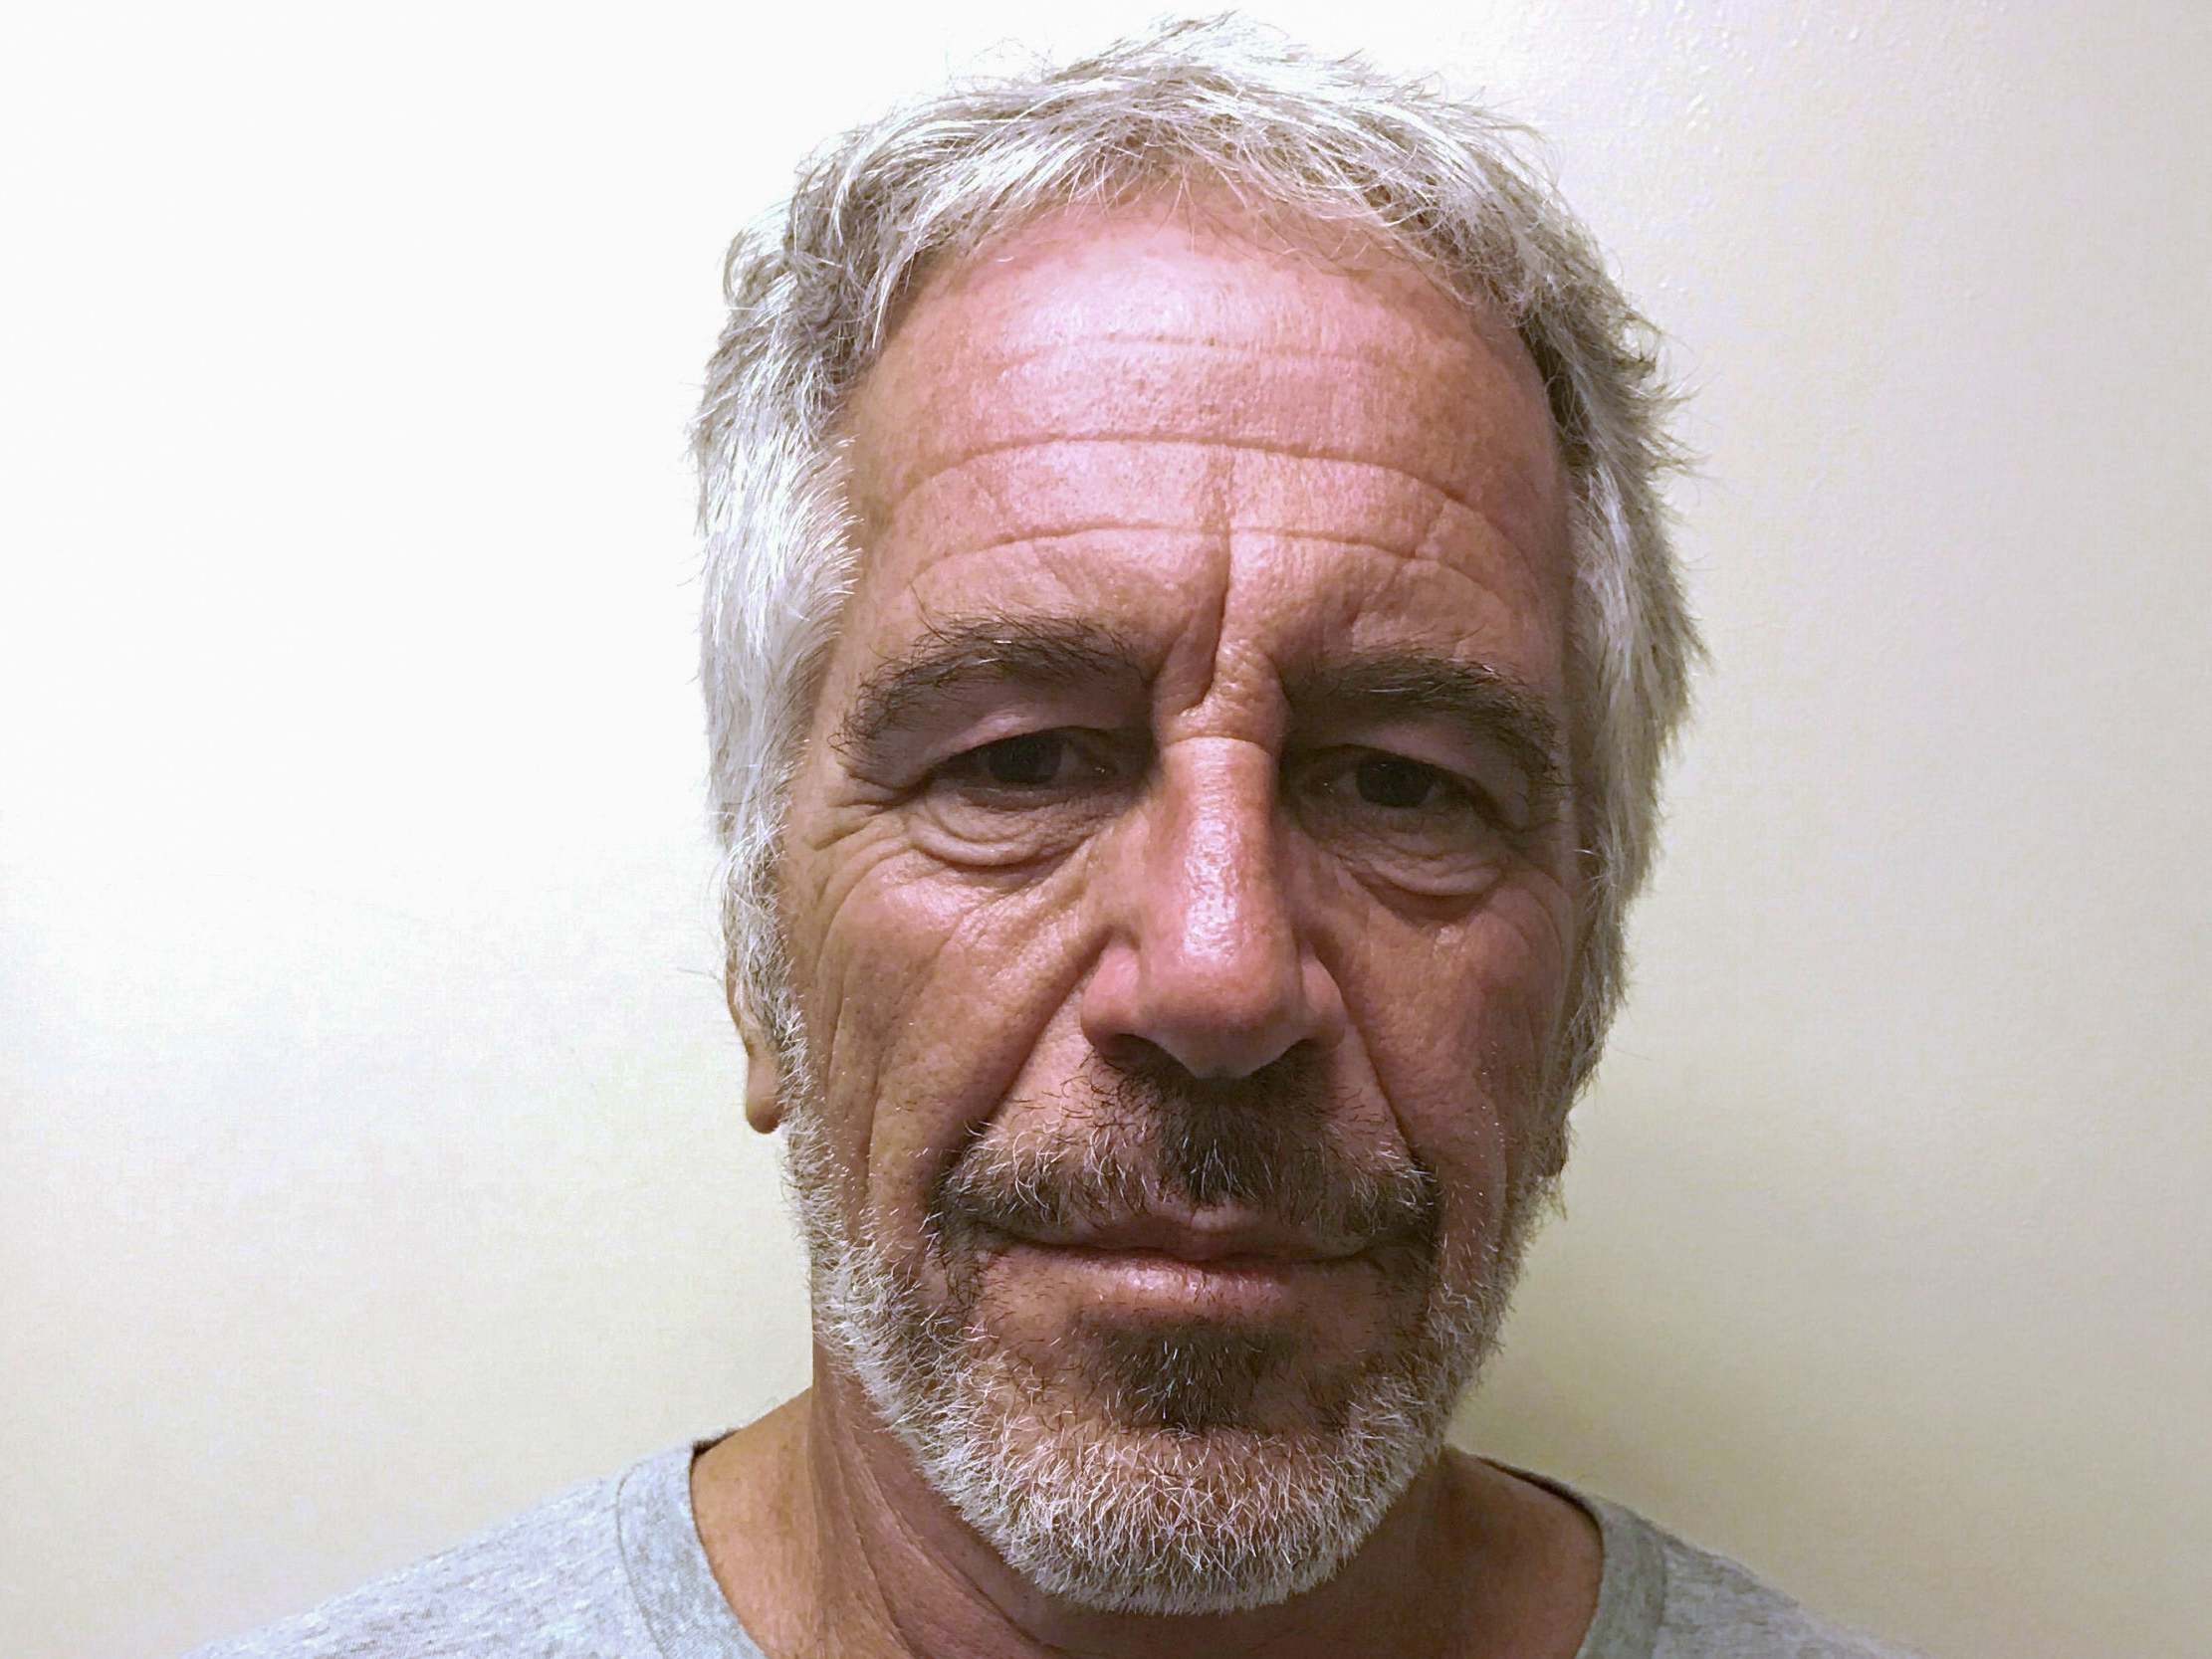 Trump's attorney general says 'serious irregularities' at Jeffrey Epstein's prison as conspiracy theories swirl